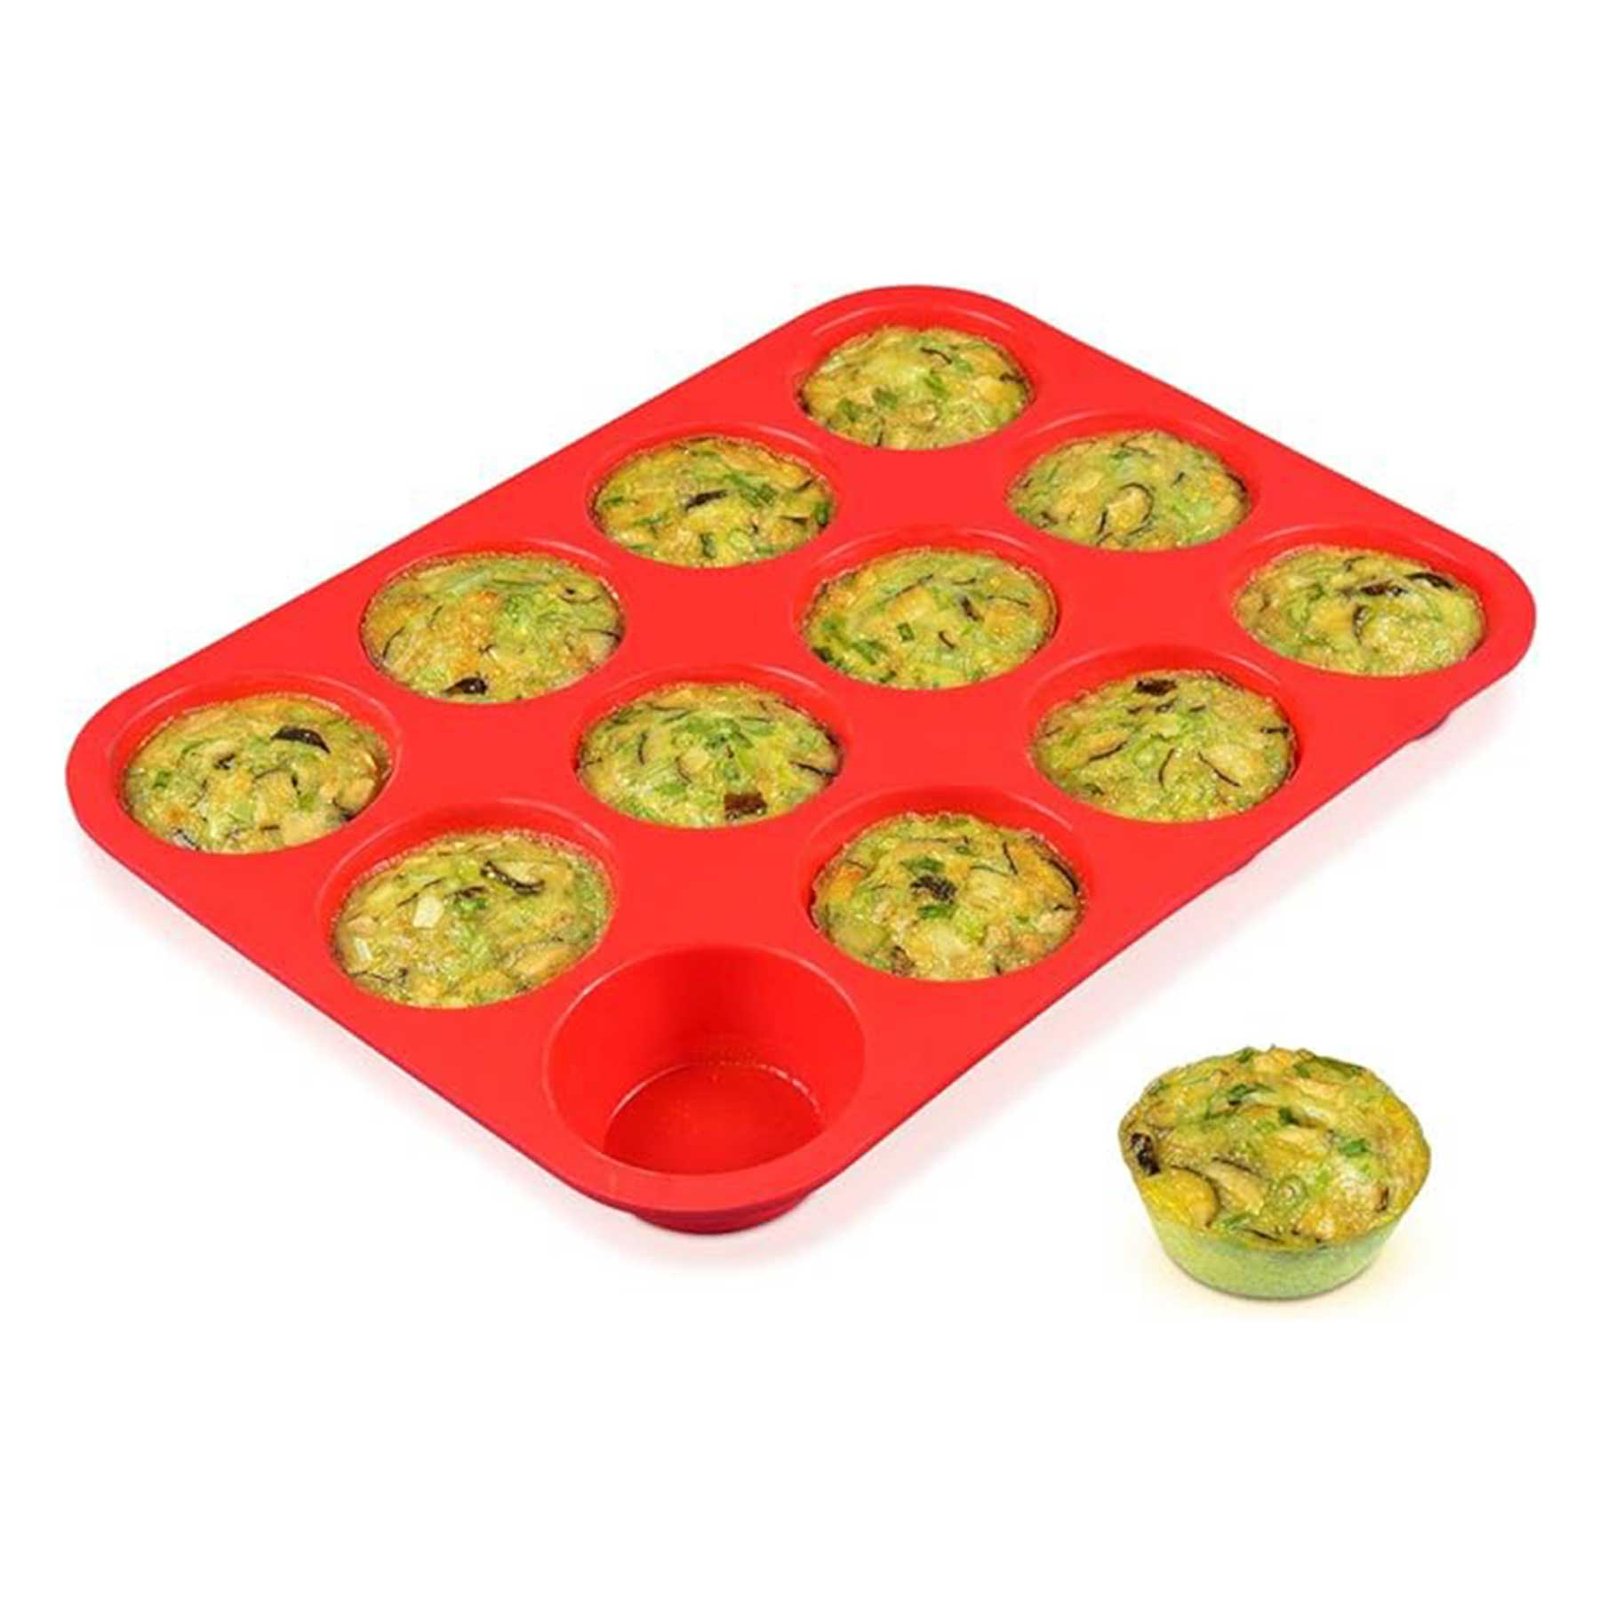 CAKETIME 12 Cups Silicone Muffin Pan